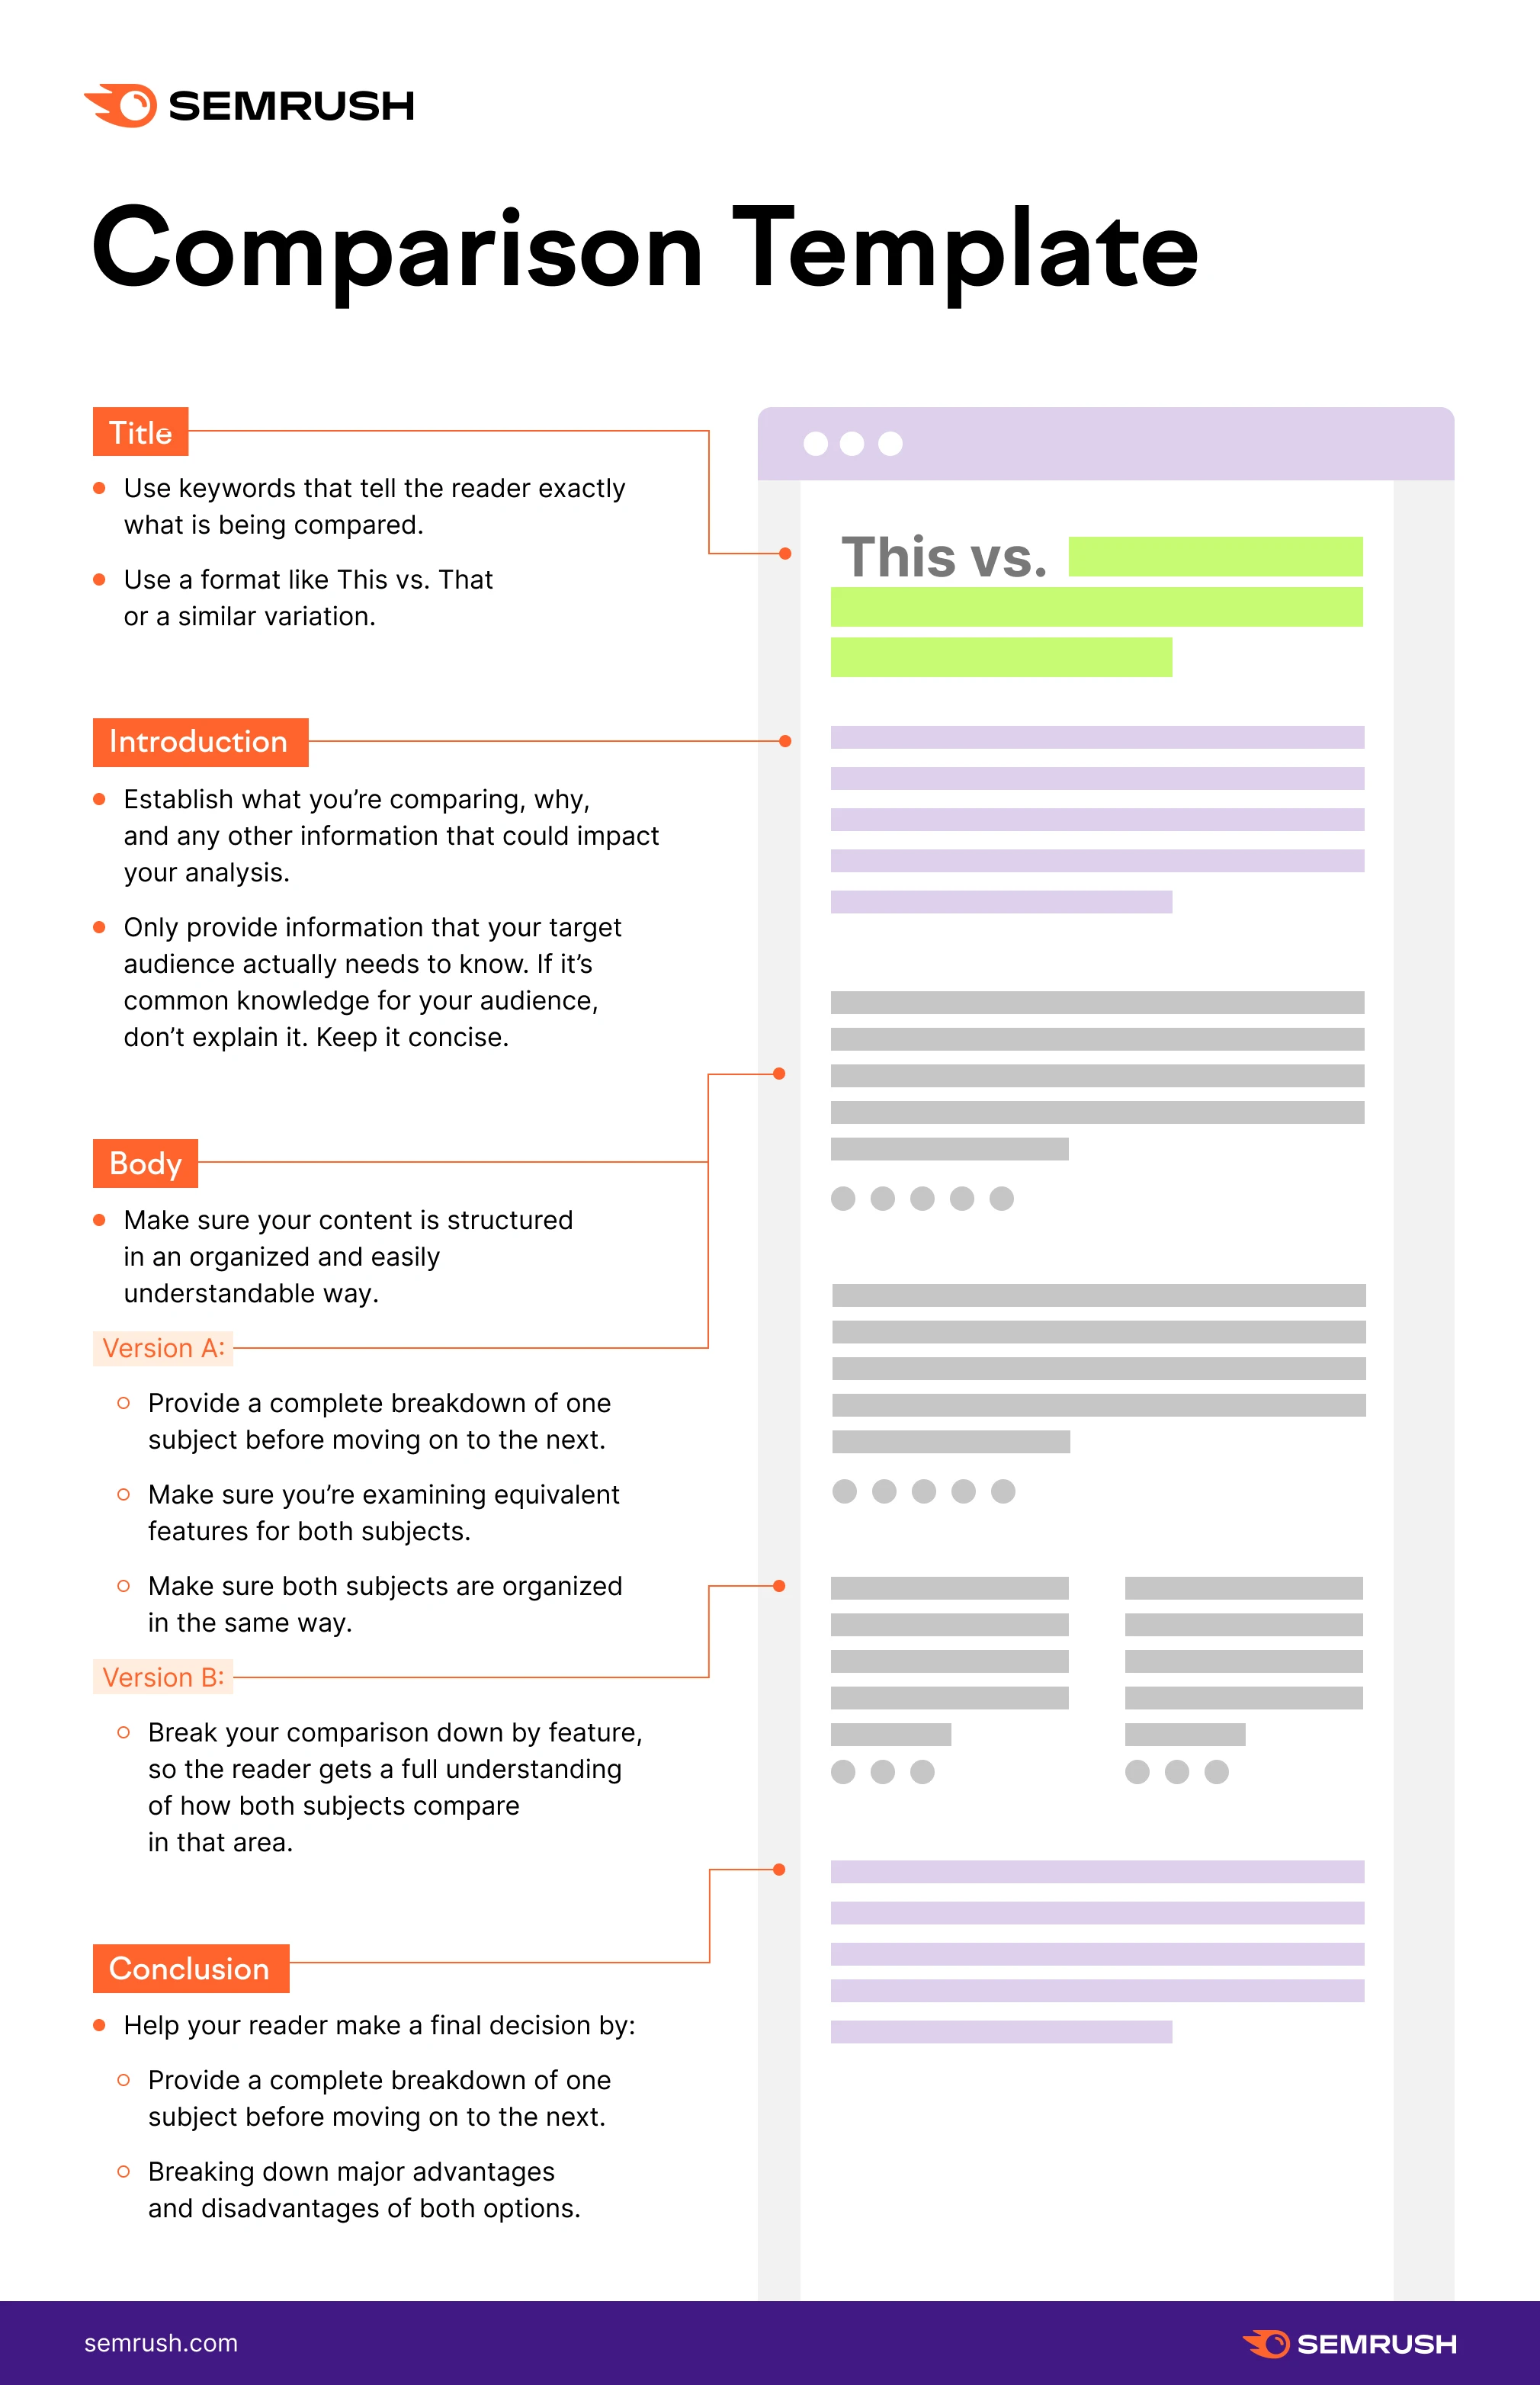 Use These Blog Post Templates to Write Better SEO Content (Ahrefs